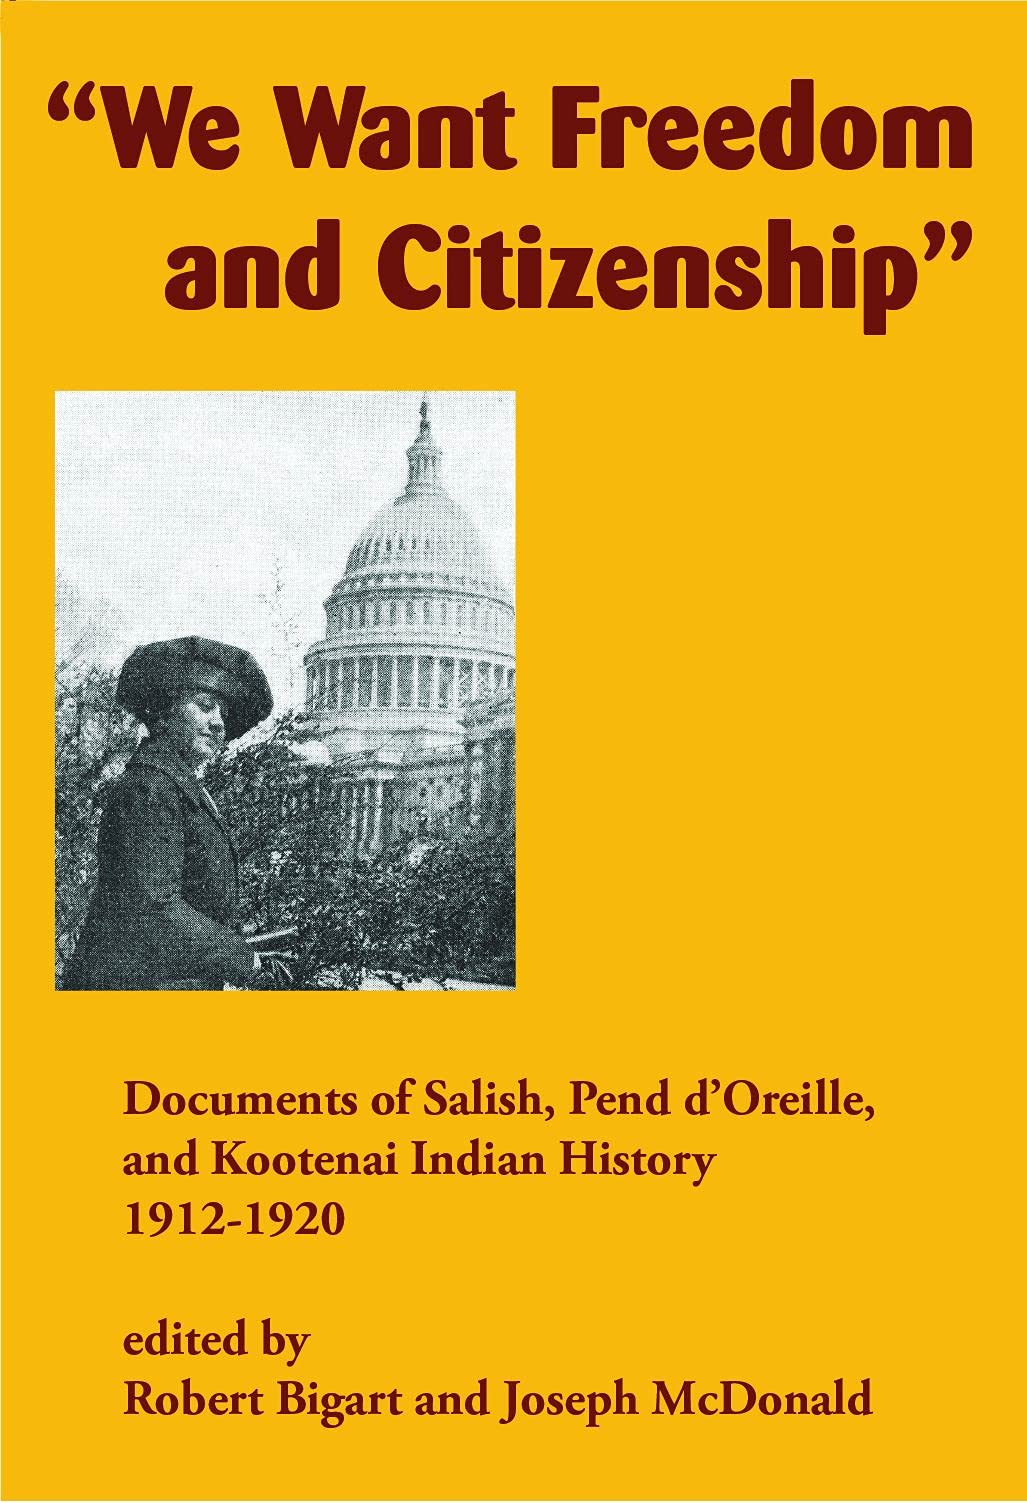 We Want Freedom and Citizenship: Documents of Salish, Pend d'Oreille, and Kootenai Indian History, 1912-1920 edited by Robert Bigart & Joseph McDonald